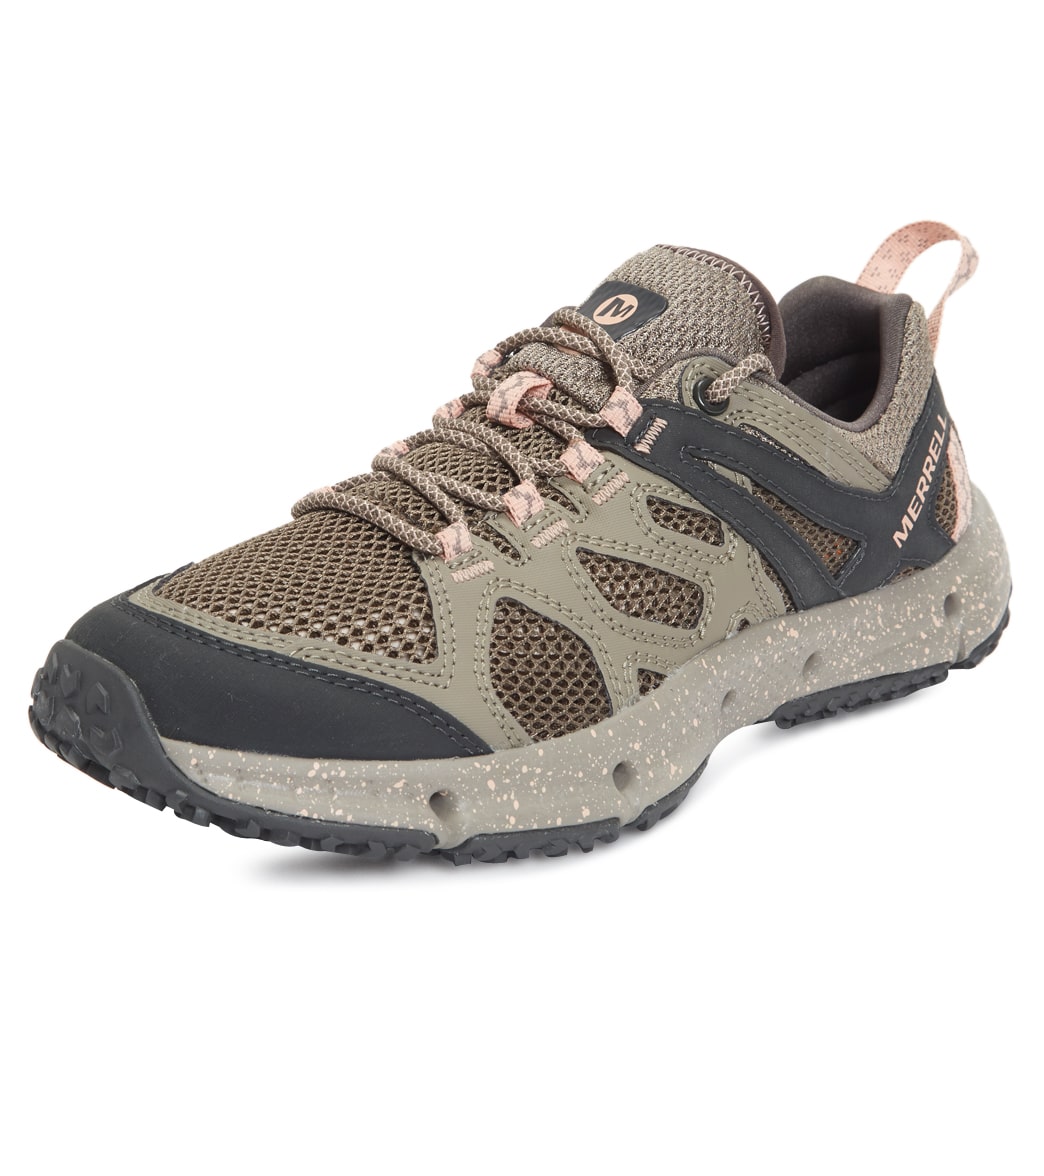 merrell water shoes womens